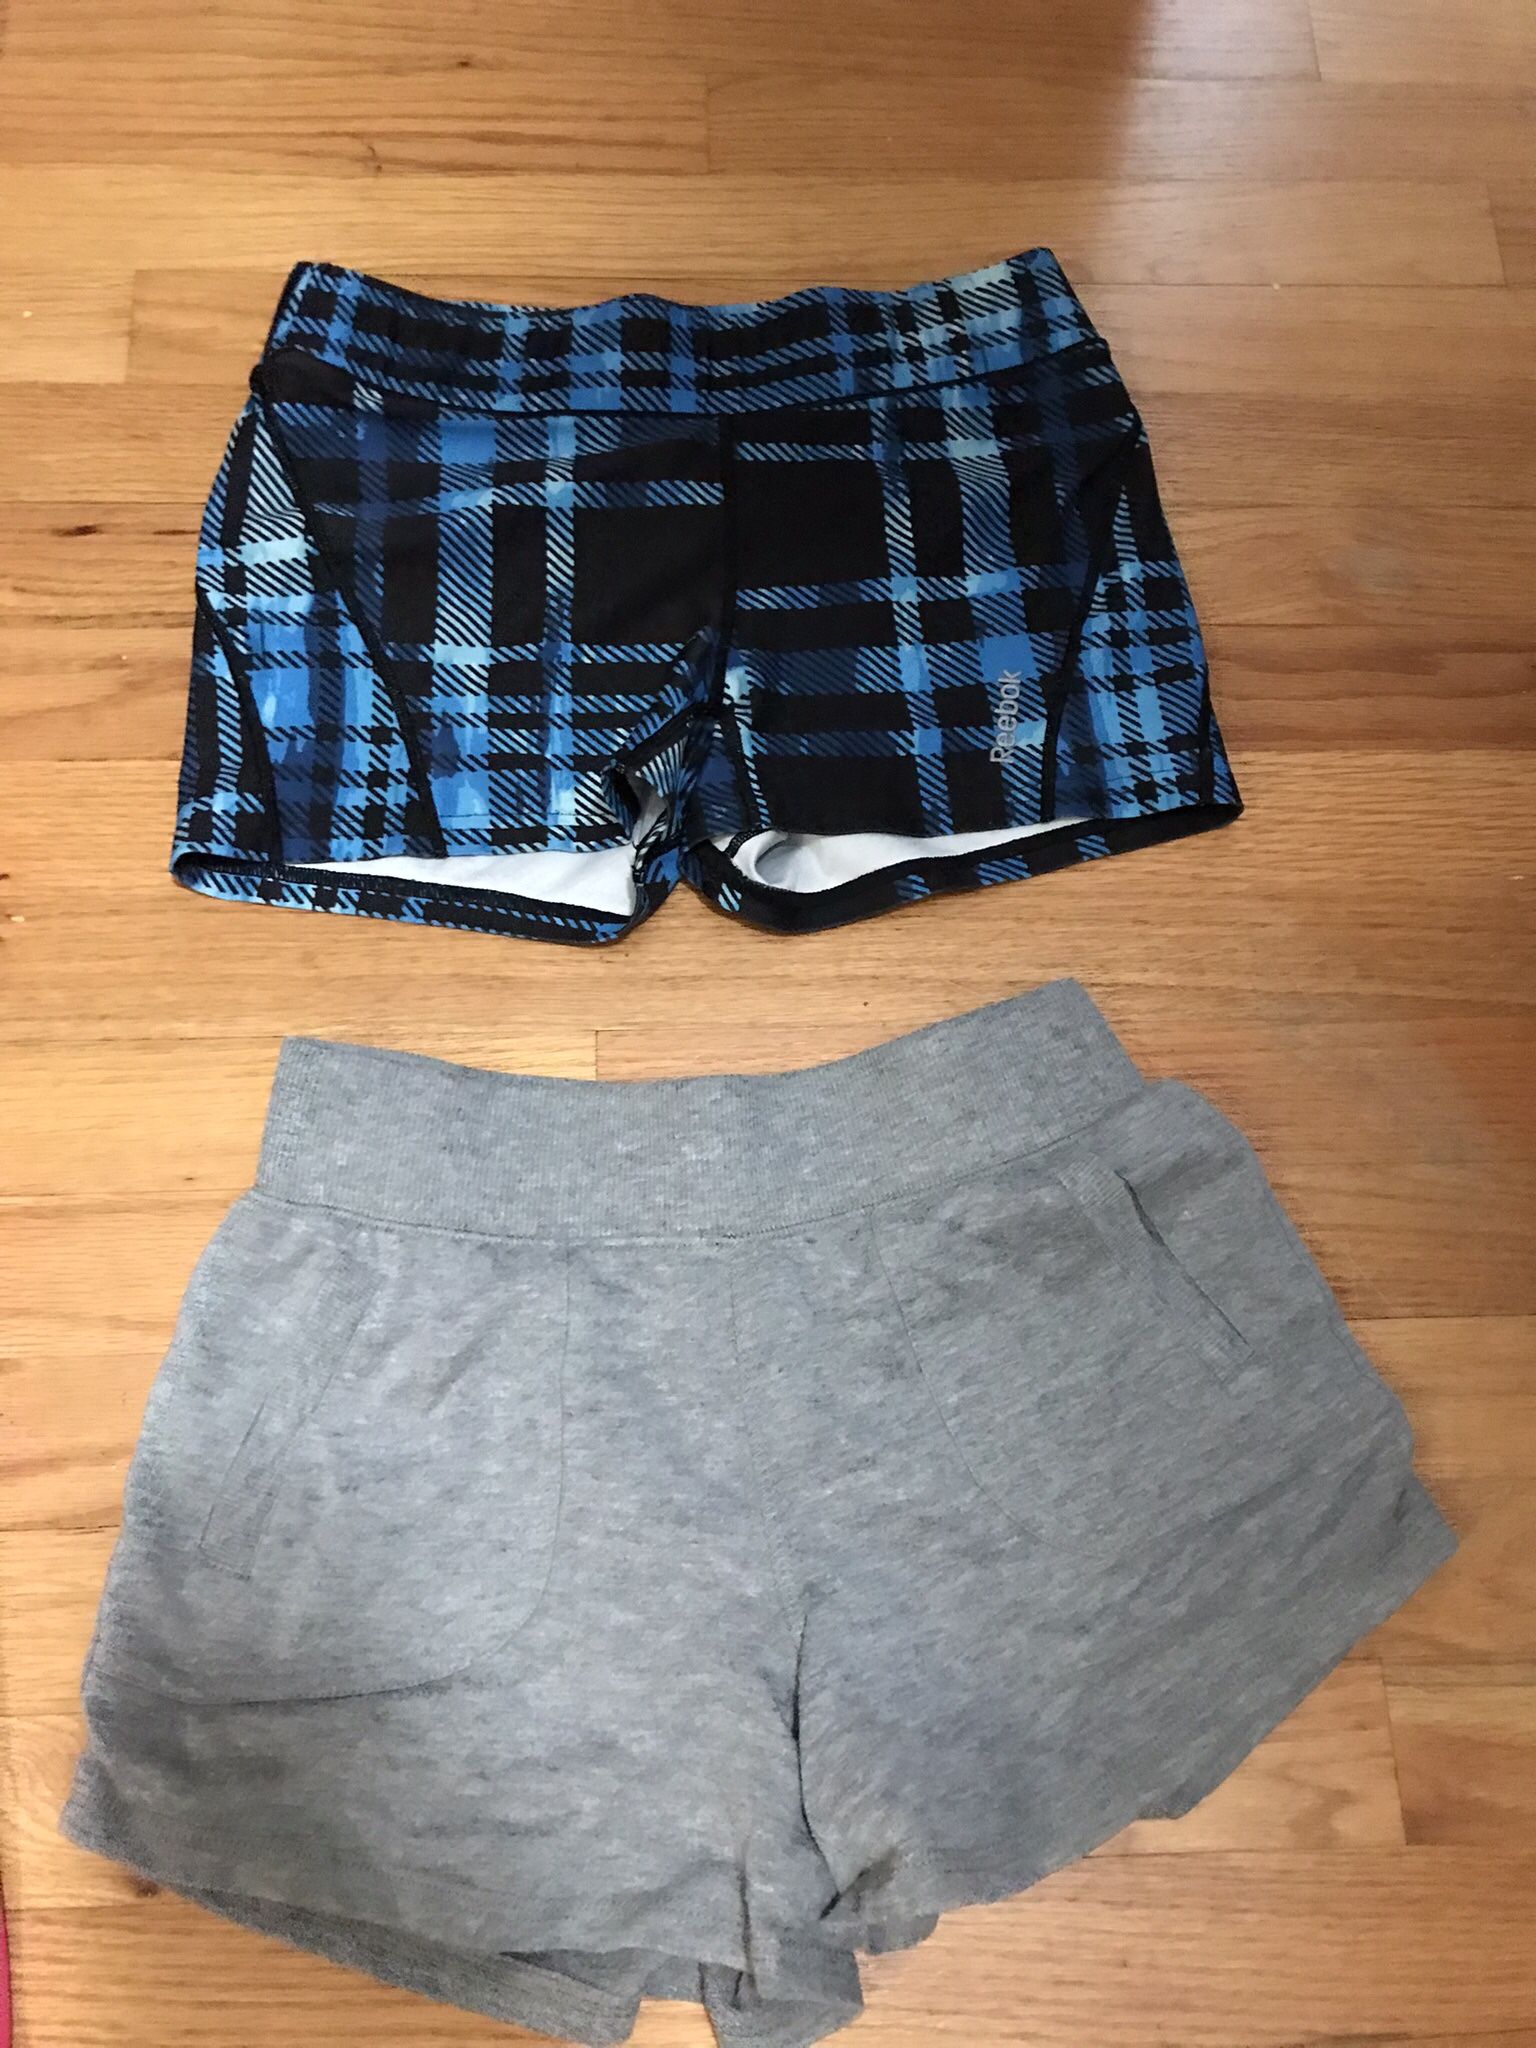 Workout Shorts And More!